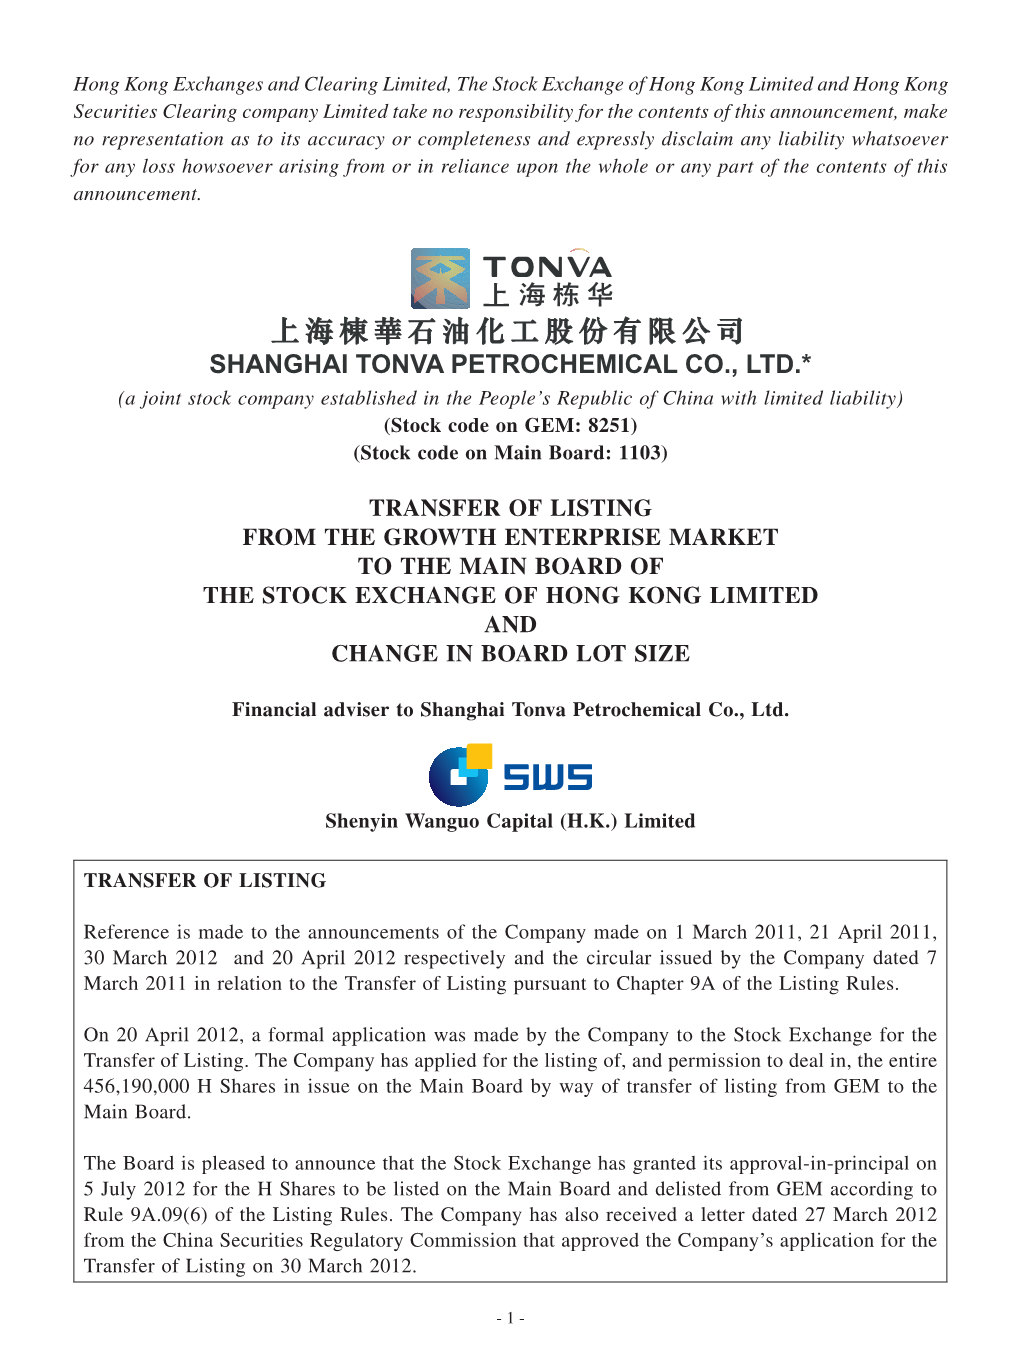 Transfer of Listing from the Growth Enterprise Market to the Main Board of the Stock Exchange of Hong Kong Limited and Change in Board Lot Size